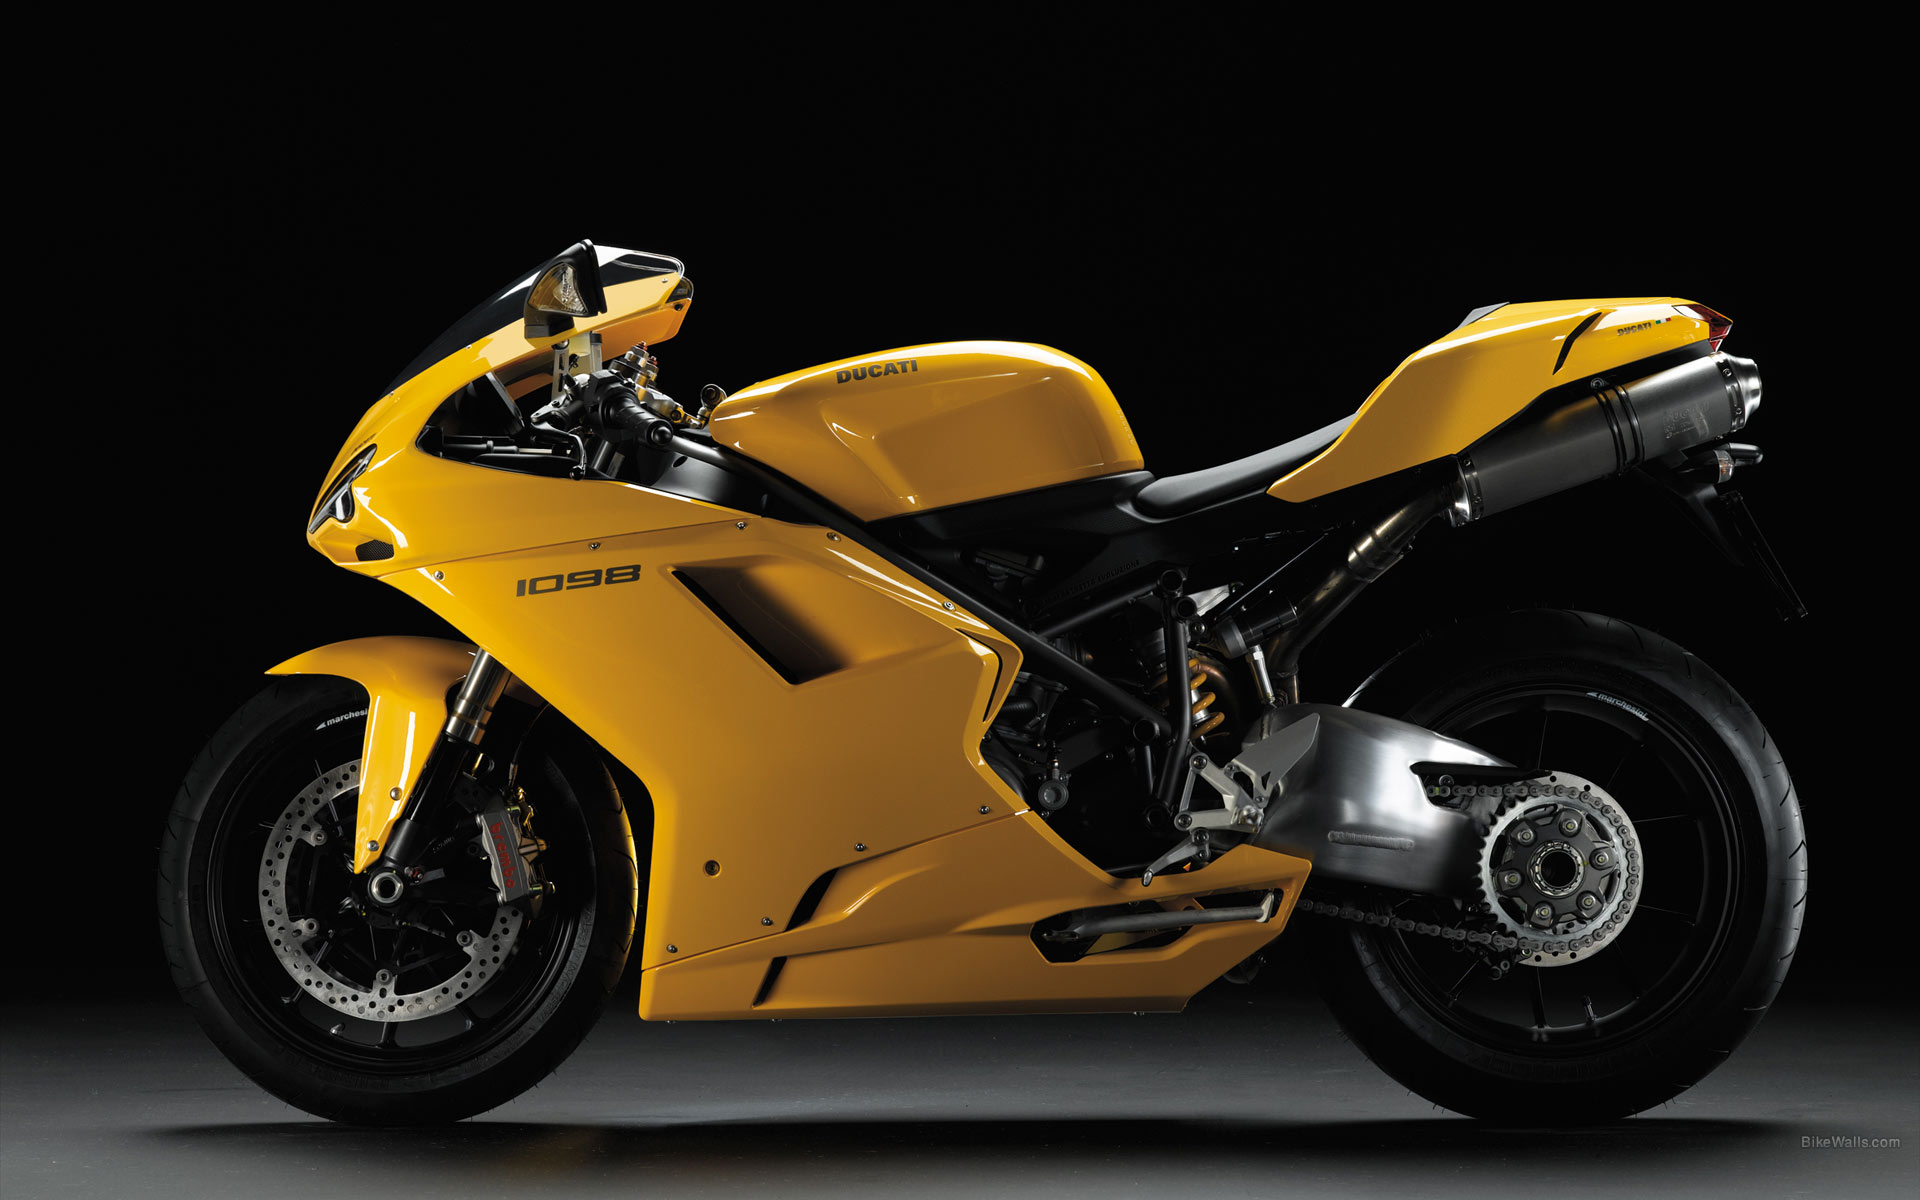 Free download Ducati Hd Wallpapers in Bikes Imagescicom